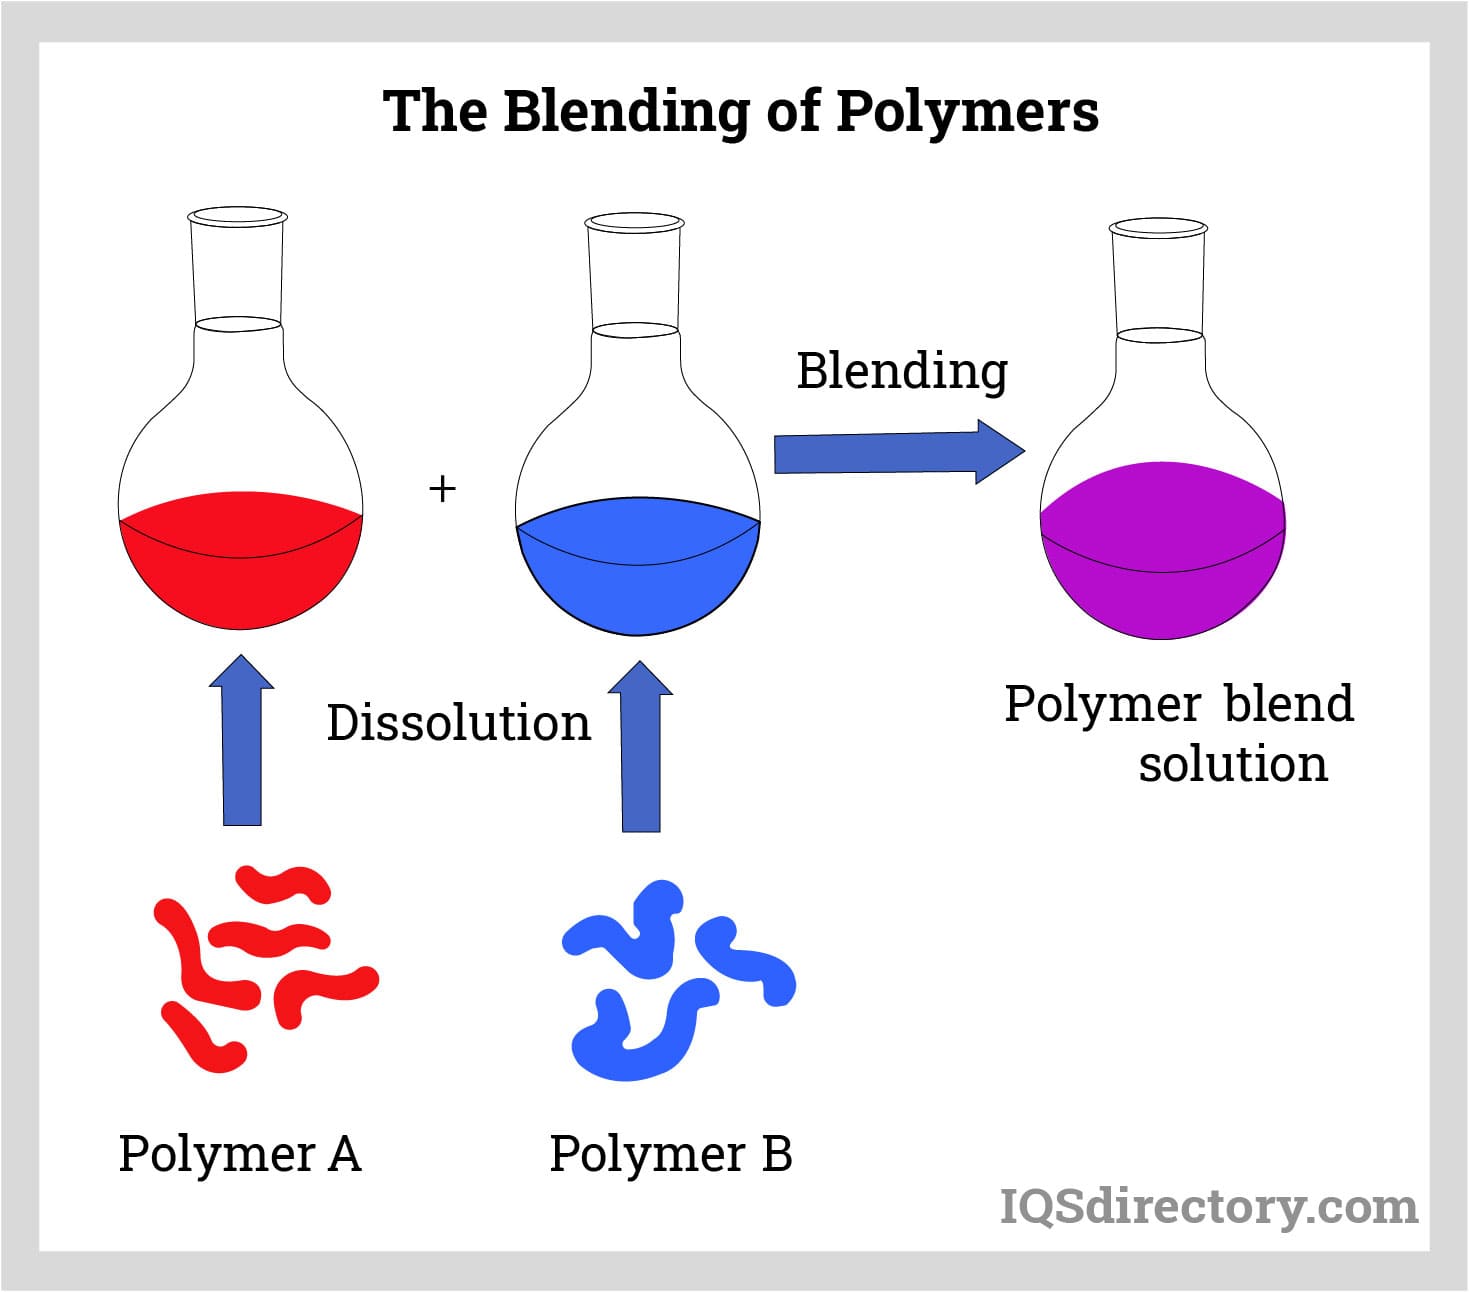 The Blending of Polymers